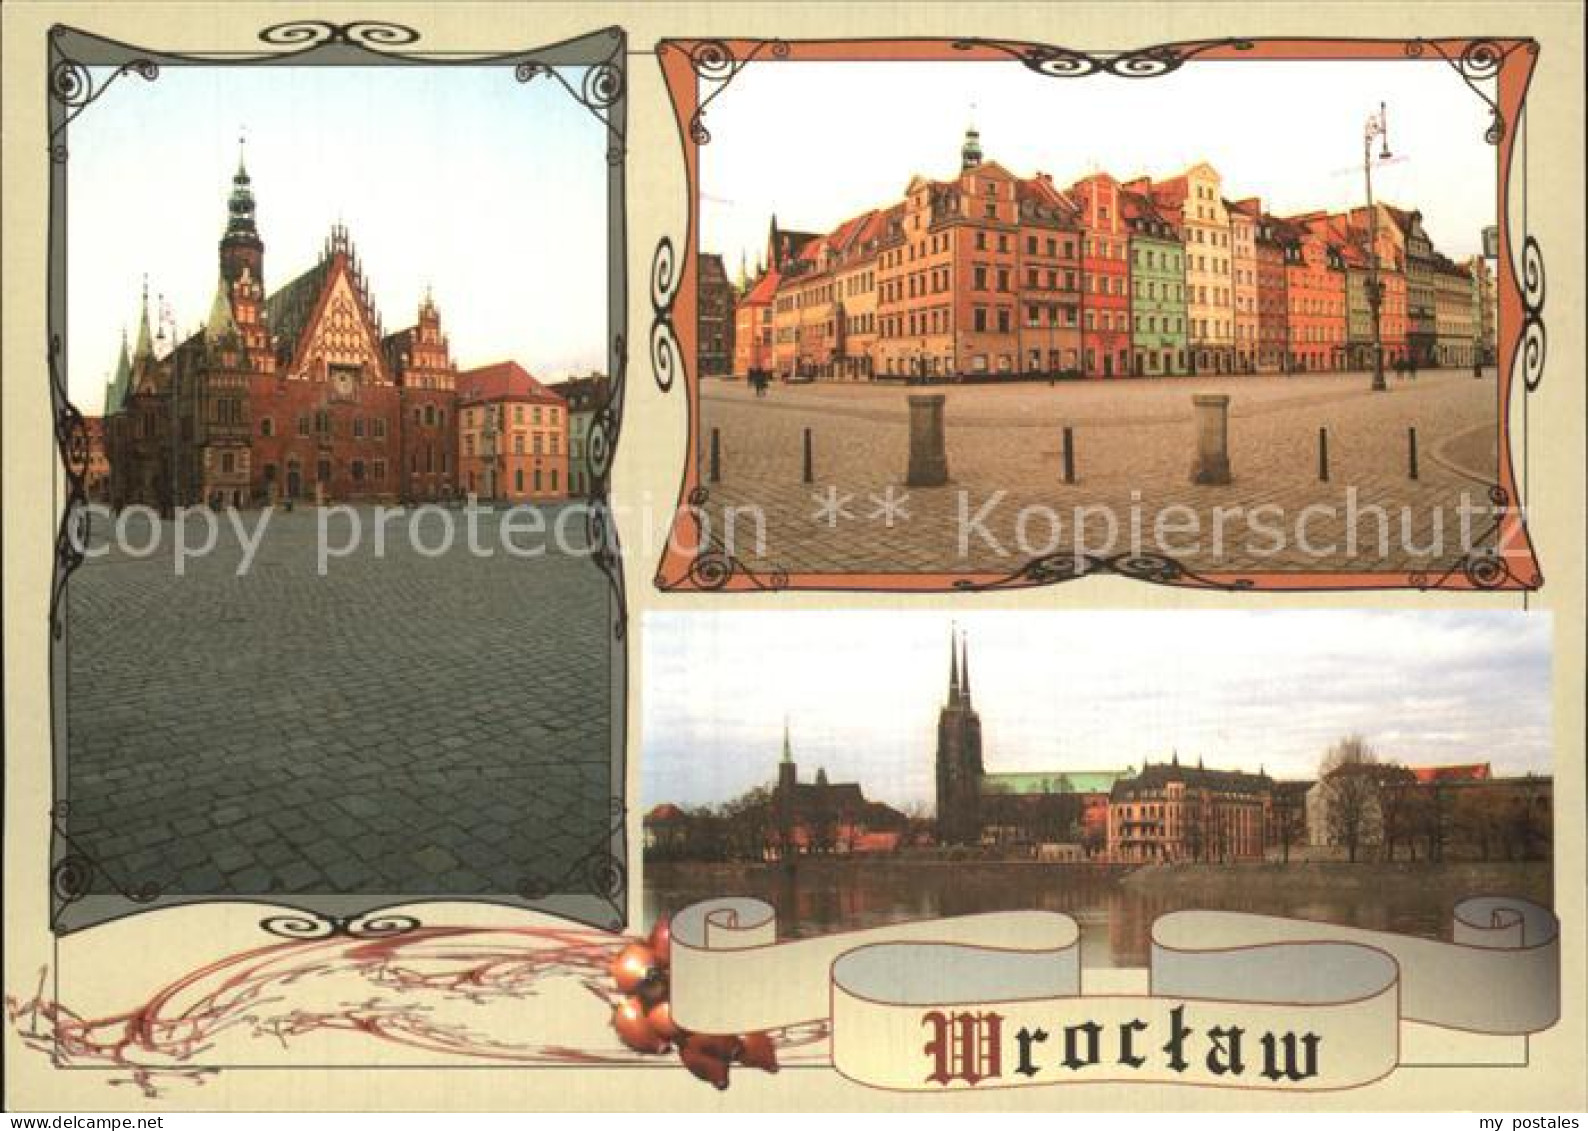 72519551 Wroclaw Rathaus Ring Dominsel  - Poland